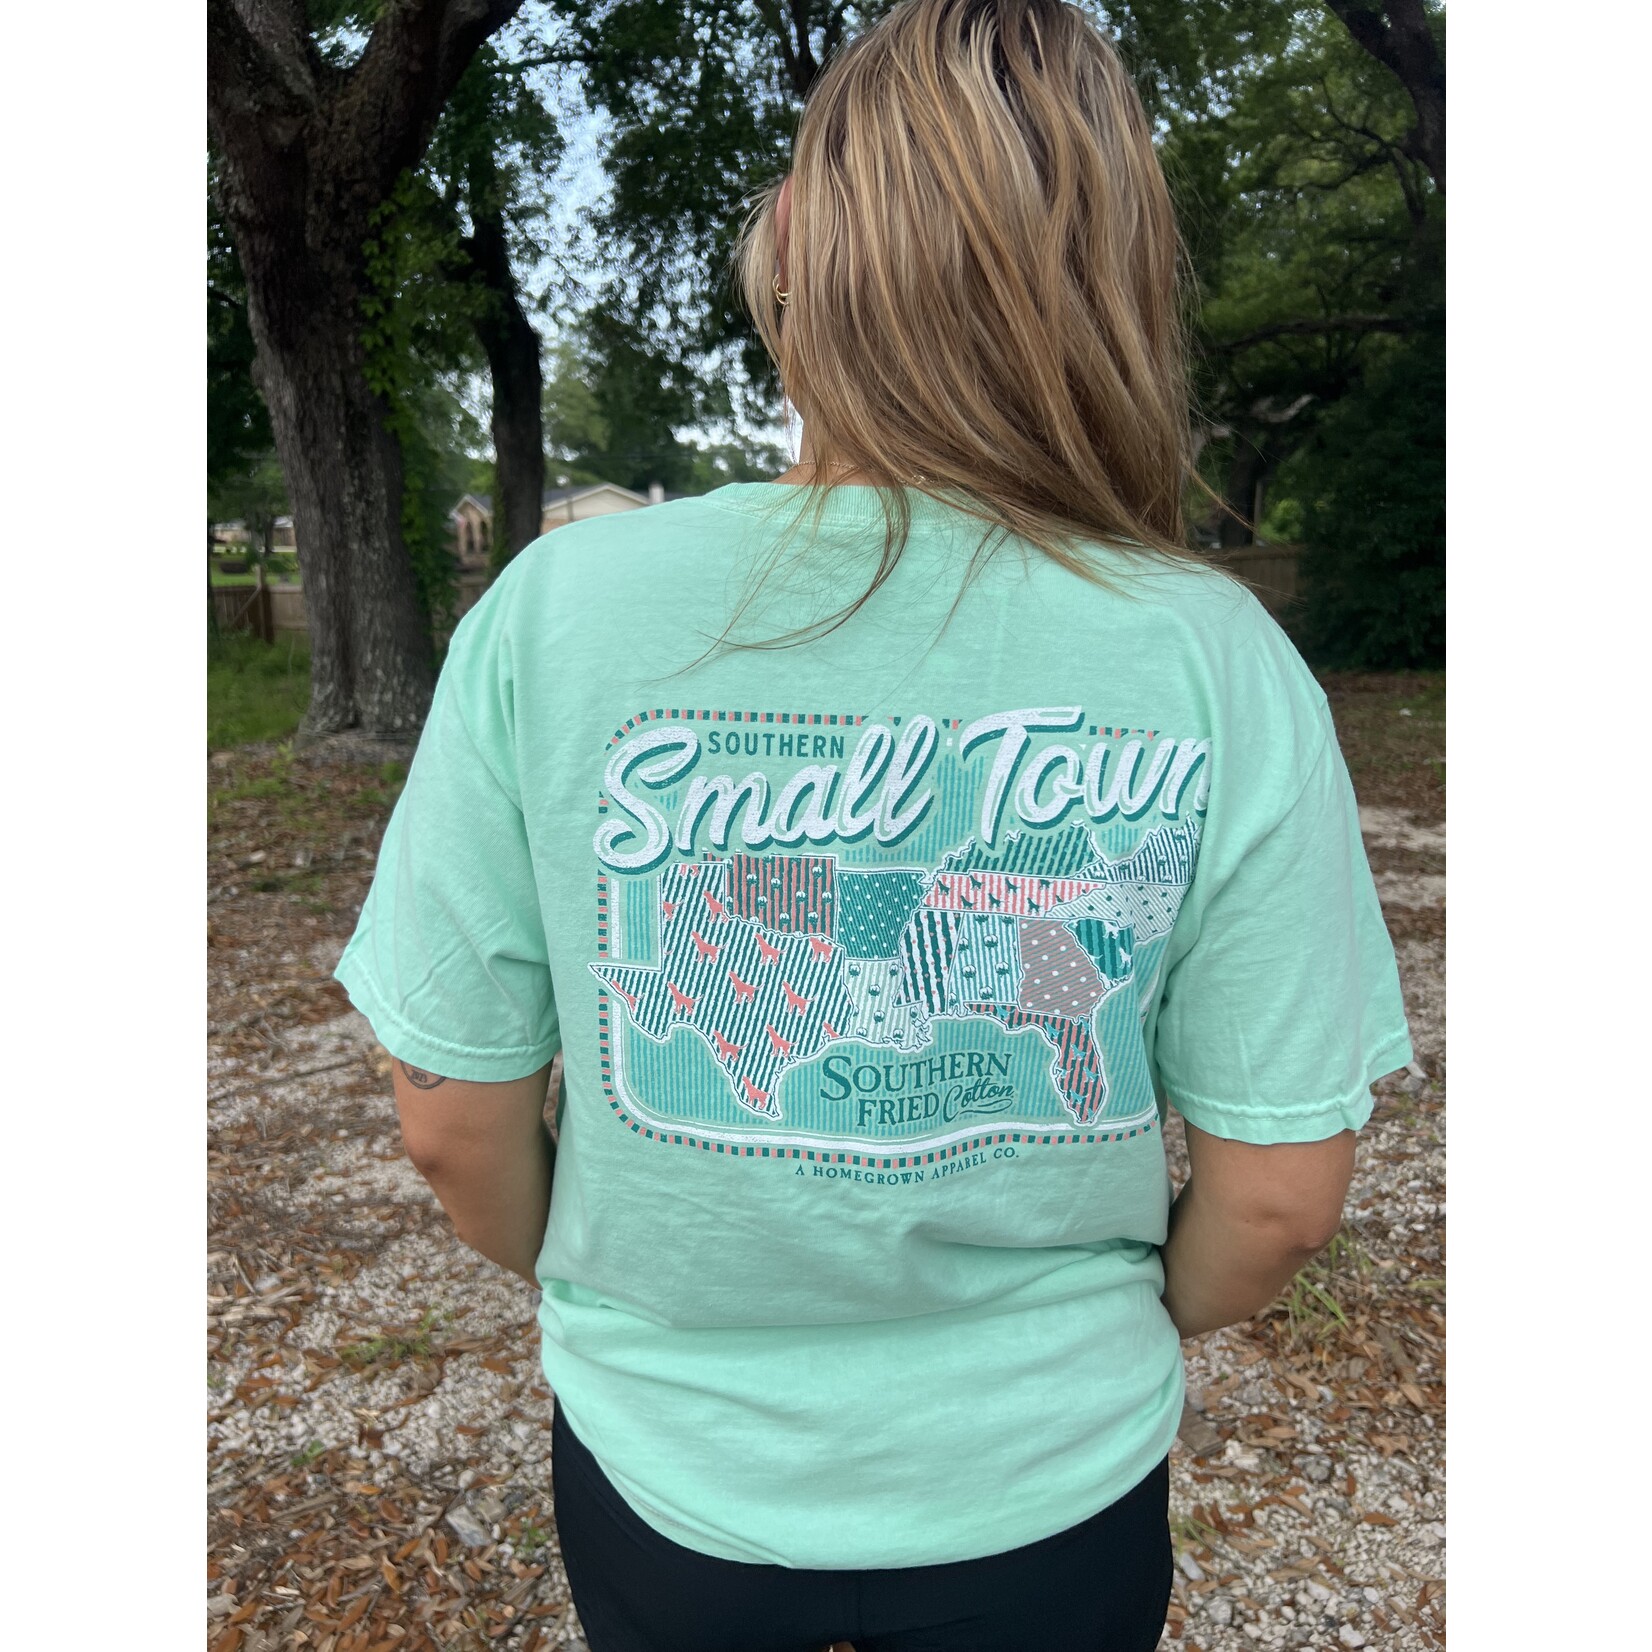 Southern Fried Cotton Southern Fried Cotton Women's Southern Small Town S/S TEE Shirt